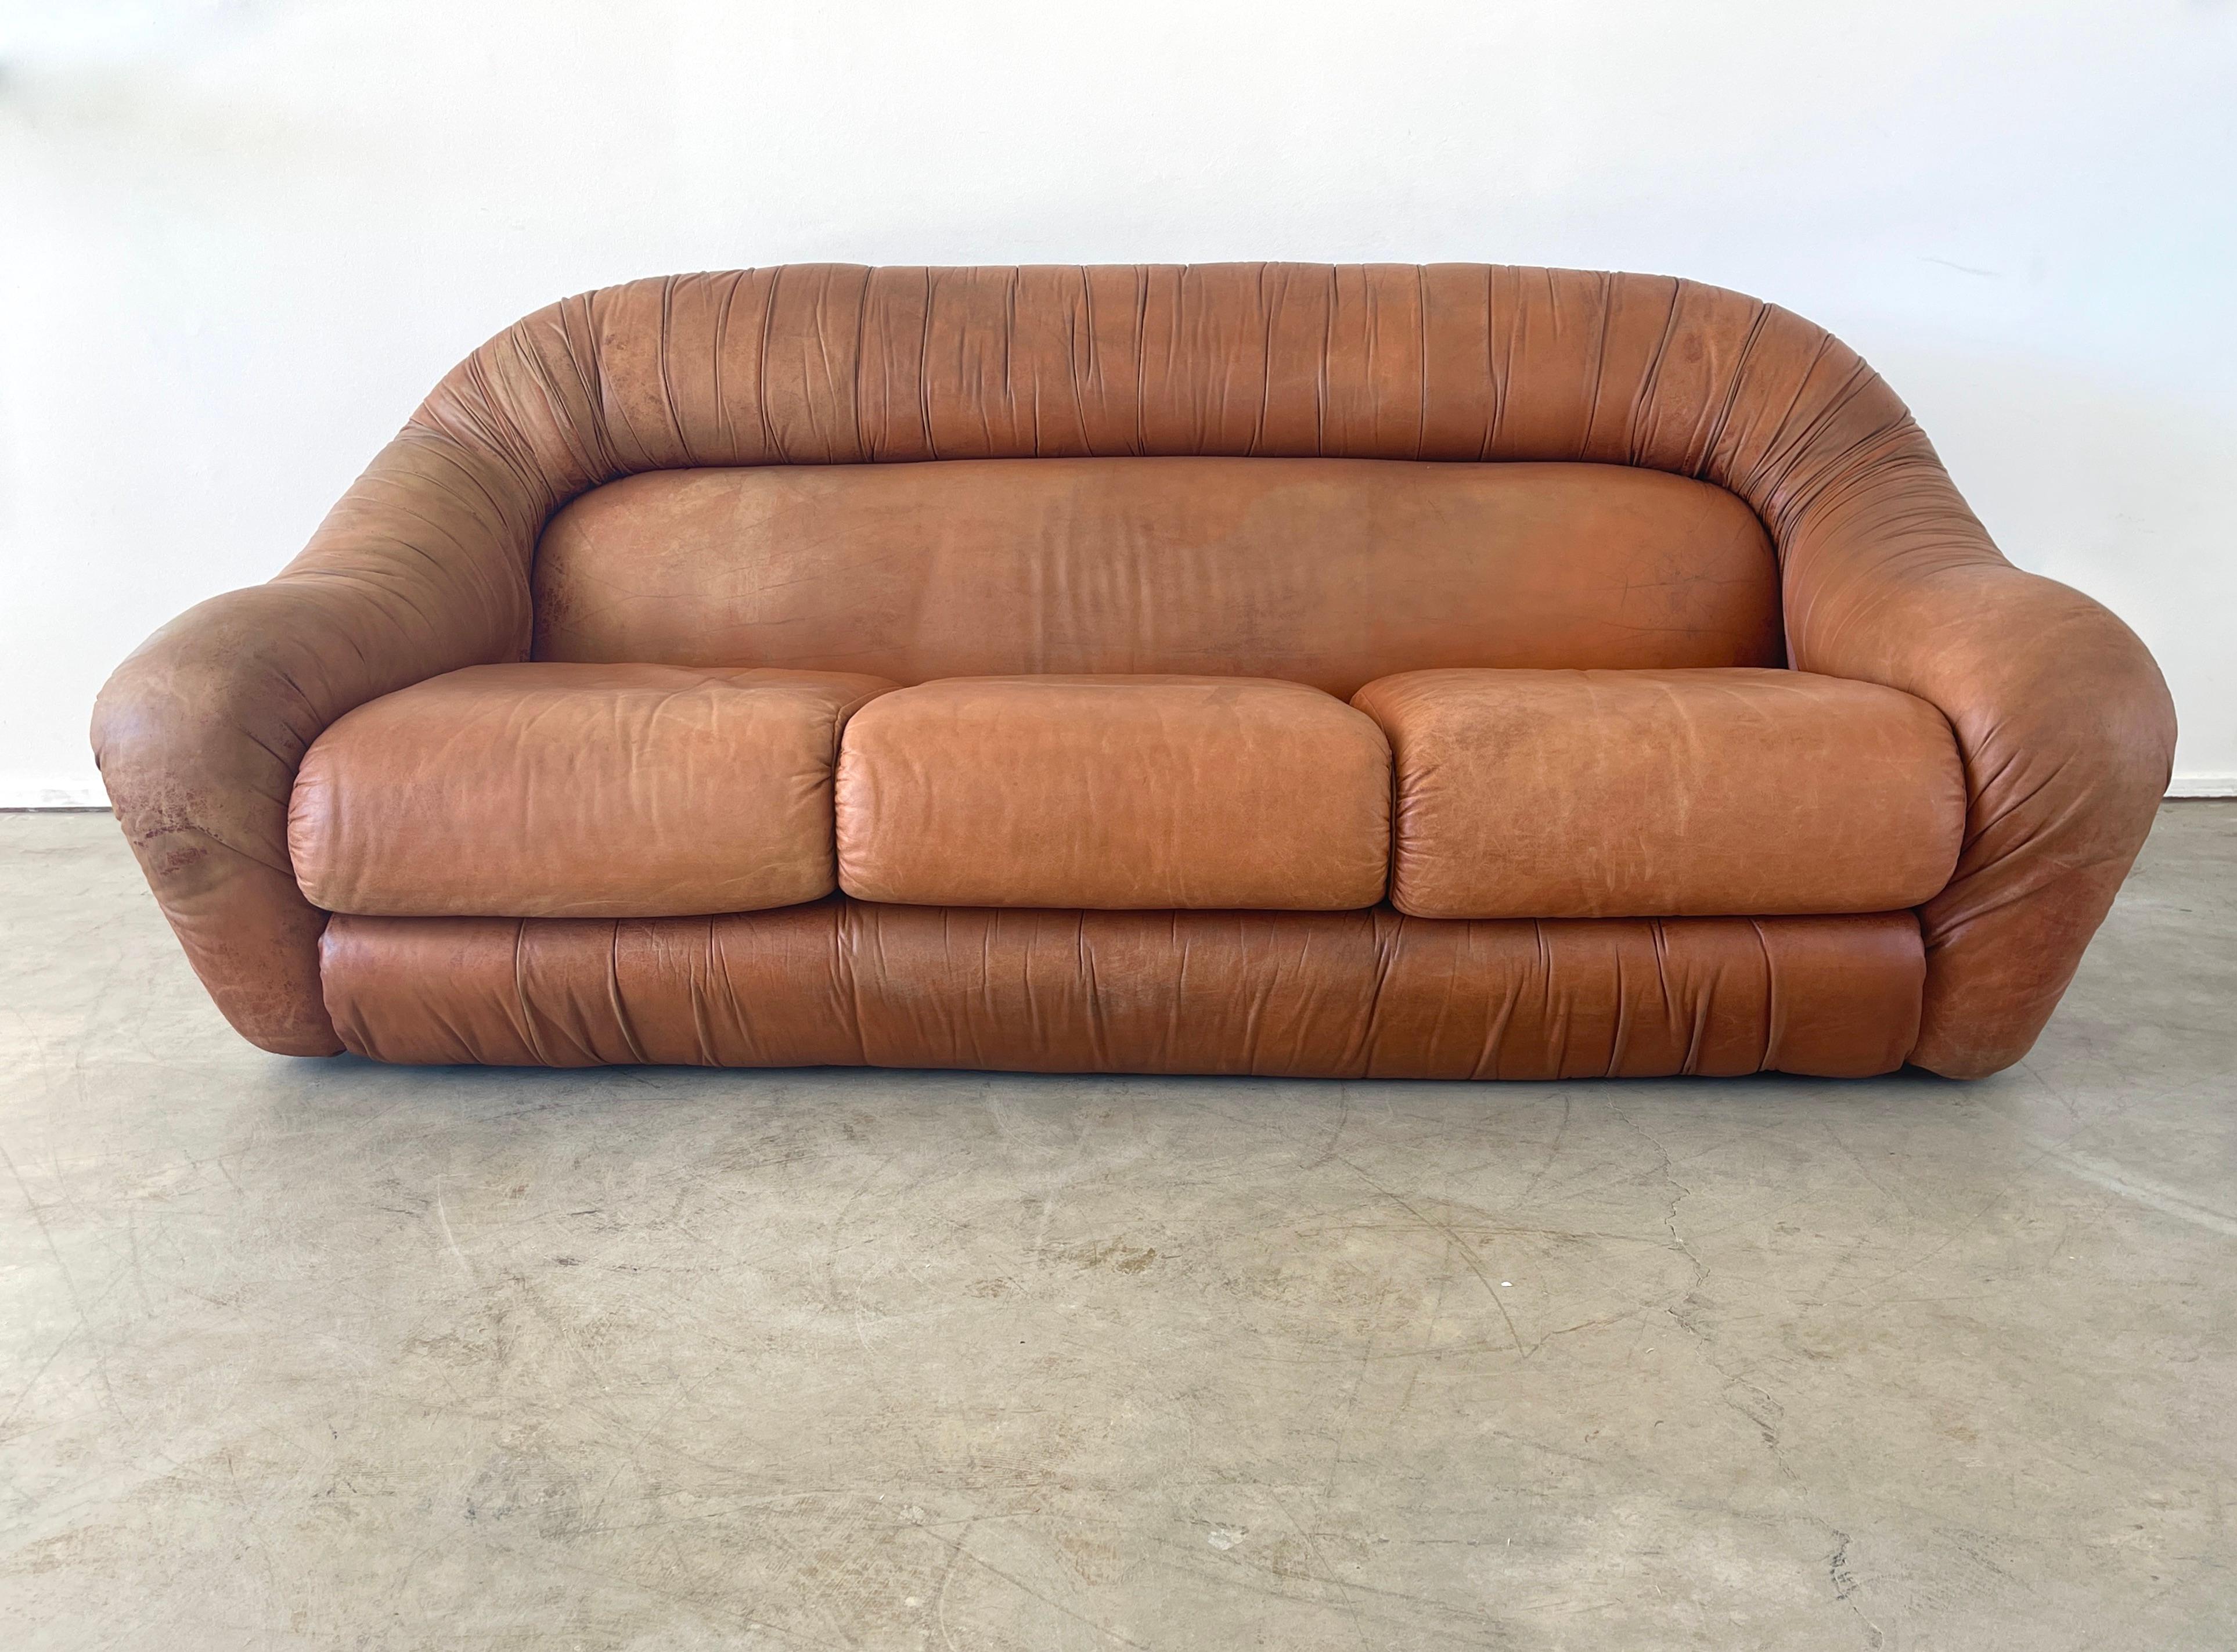 Italian 1970's three-seater sofa in caramel brown leather with a seat cushion and side armrests integrated with the sculptural curved backrest. 
Great shape - original vintage condition with wonderful patina.
 